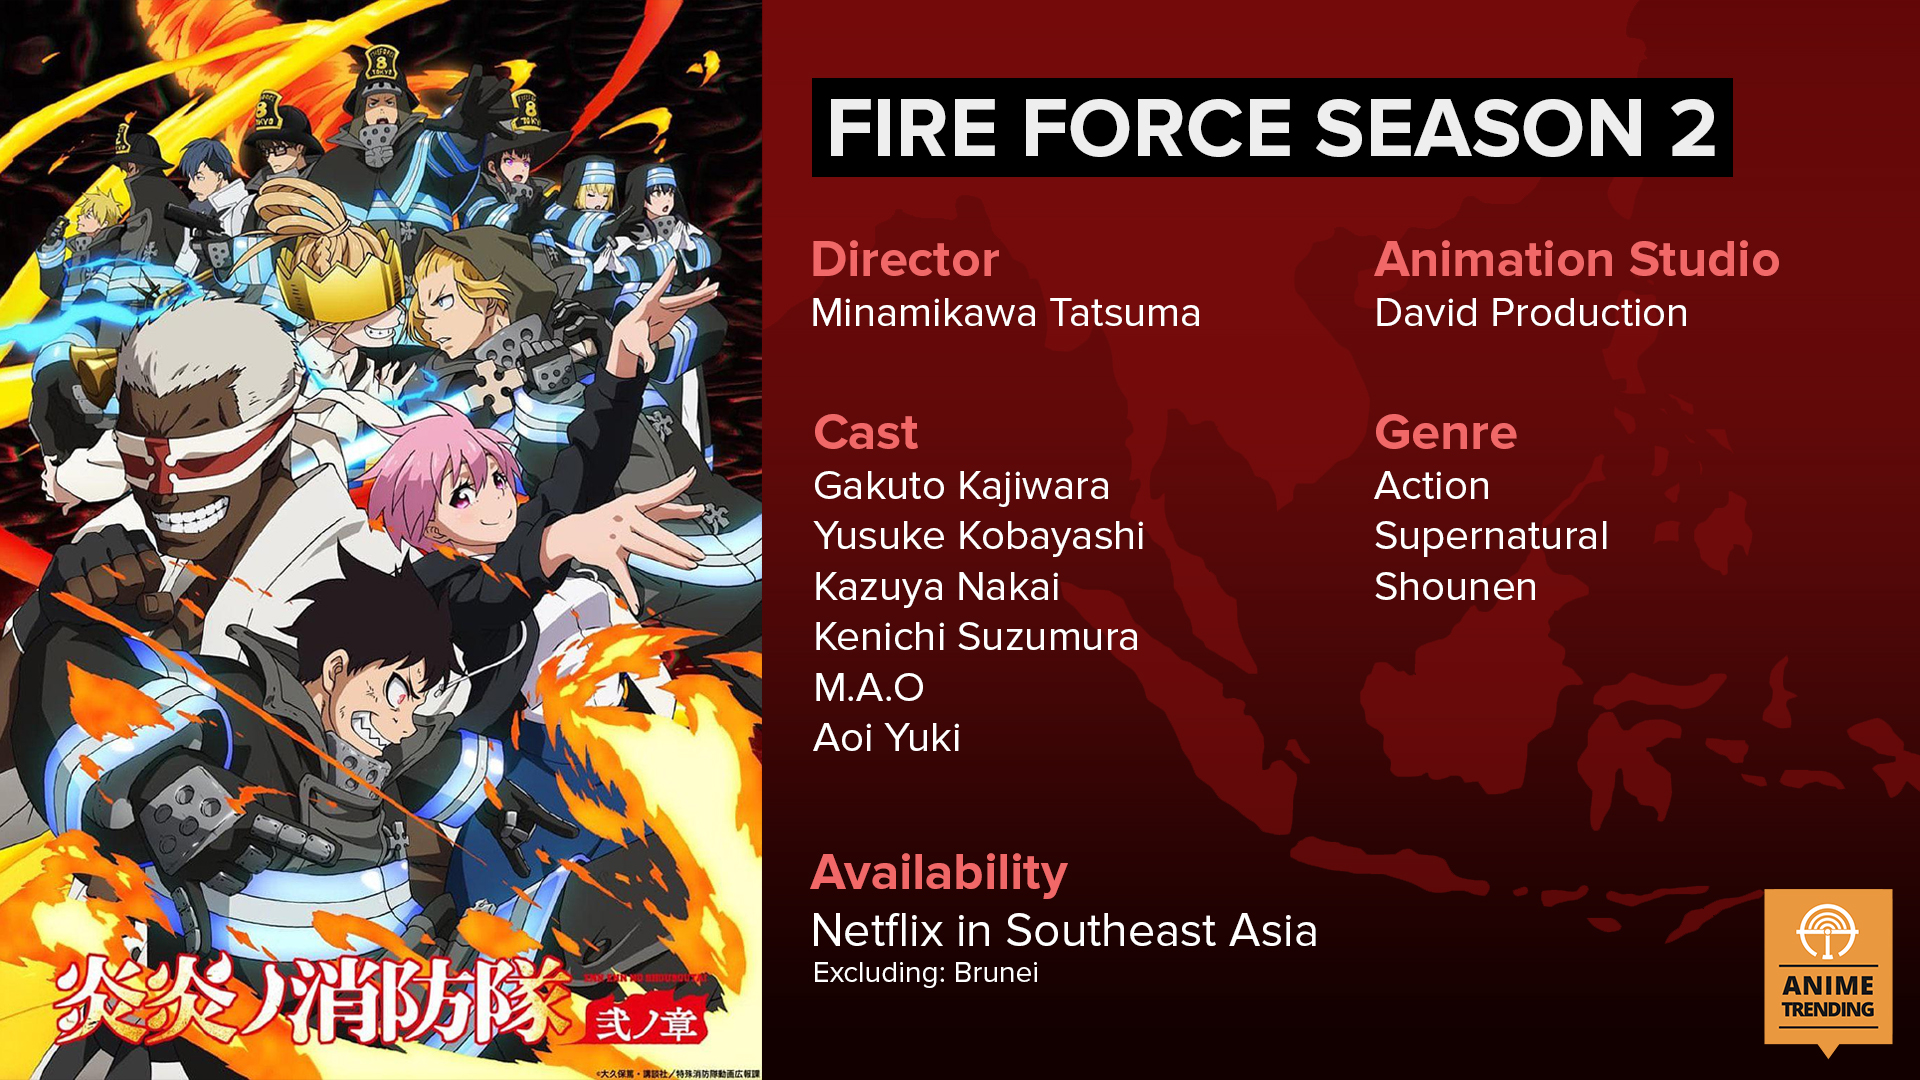 Anime Trending on X: For our friends in Southeast Asia, just to